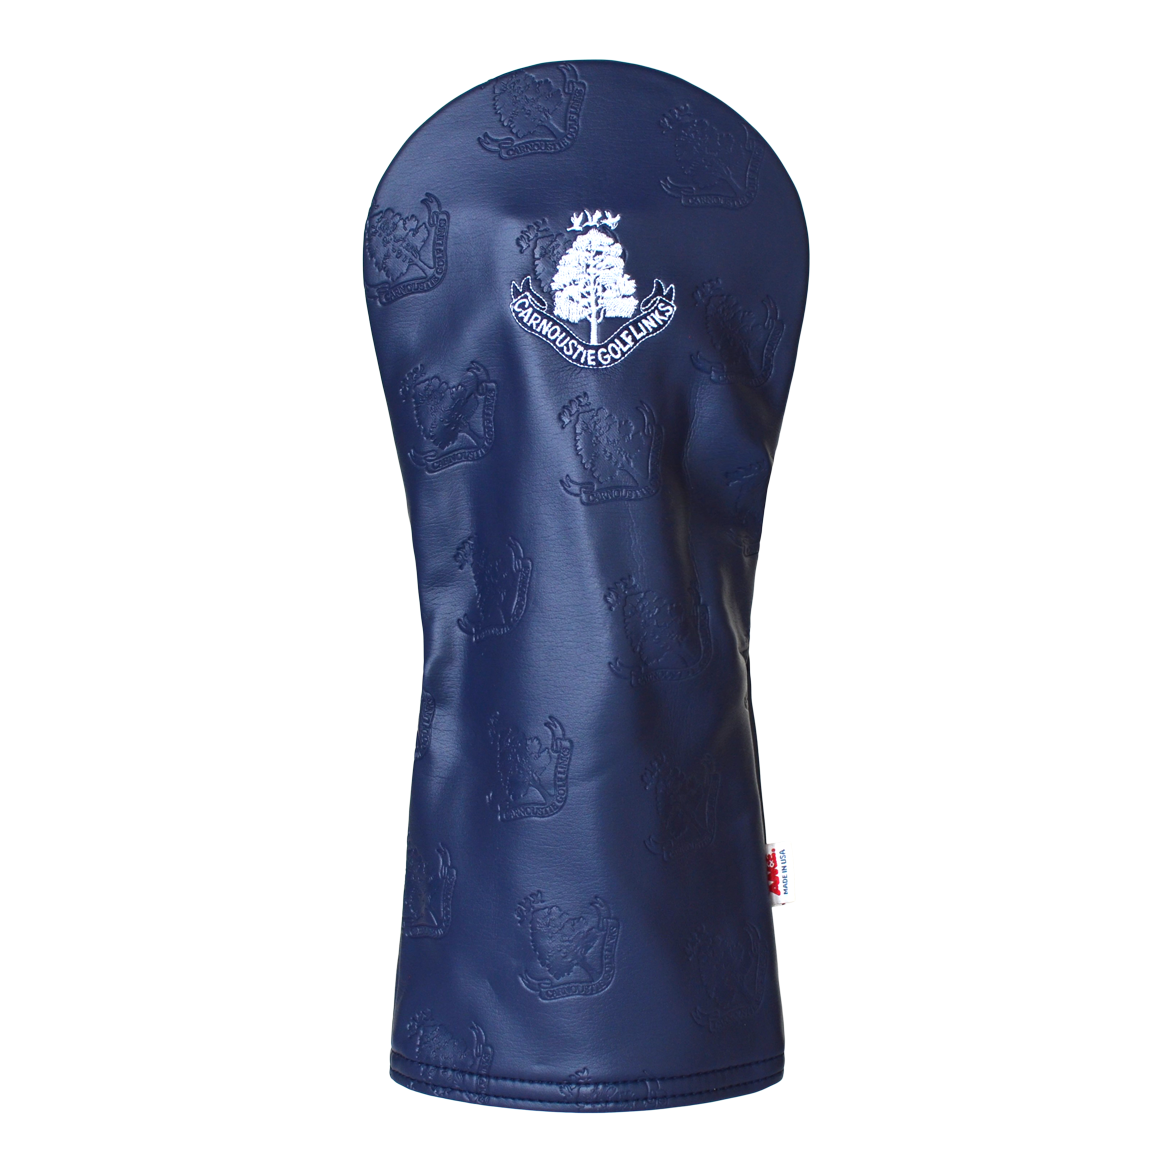 Driver "Hot Stamp" Headcover - Navy